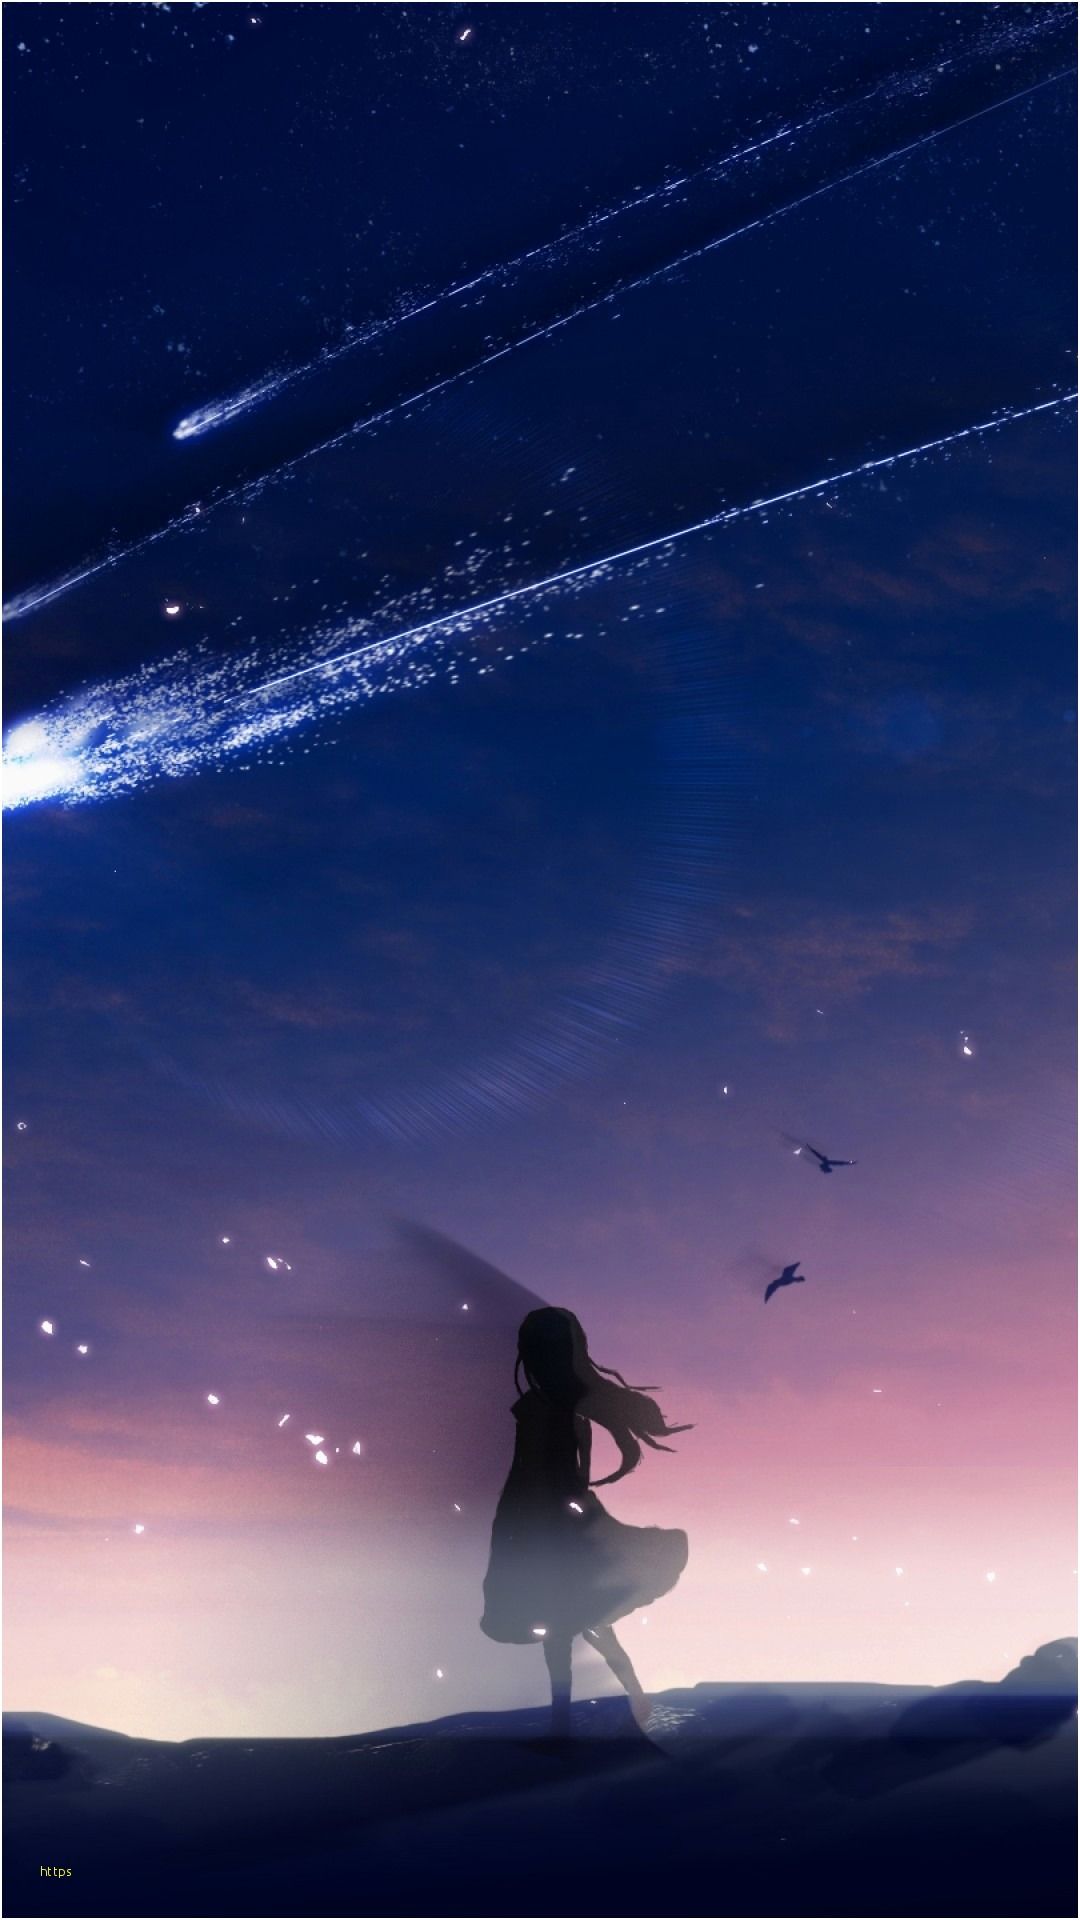 Anime iPhone Wallpaper Best Of Anime Scenery Wallpaper Scenery Wallpaper iPhone 6 Wallpaper & Background Download